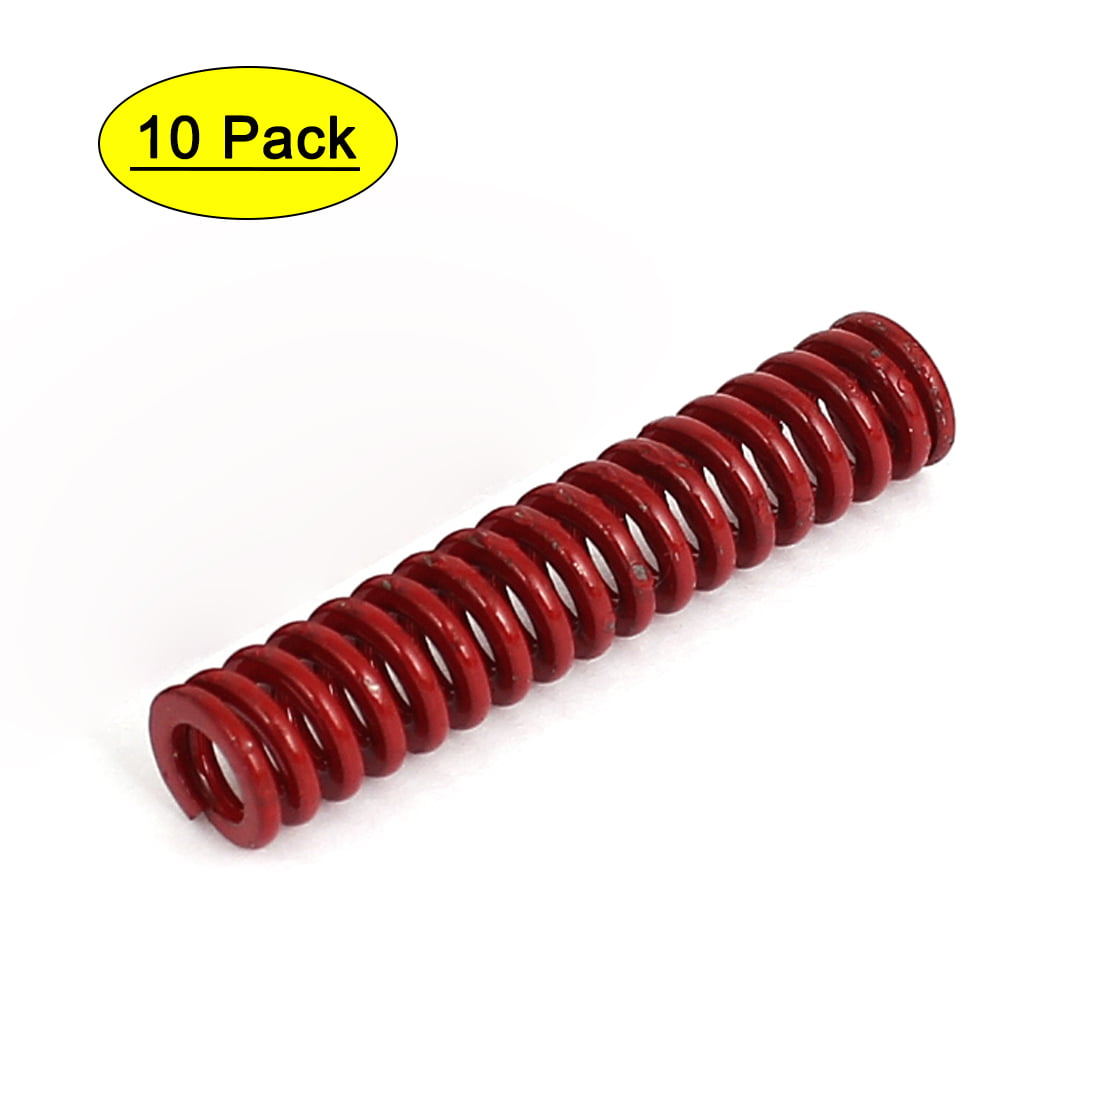 Die Springs OD 8-40mm Heavy Duty Load Green Compression Mould Spring All Sizes 